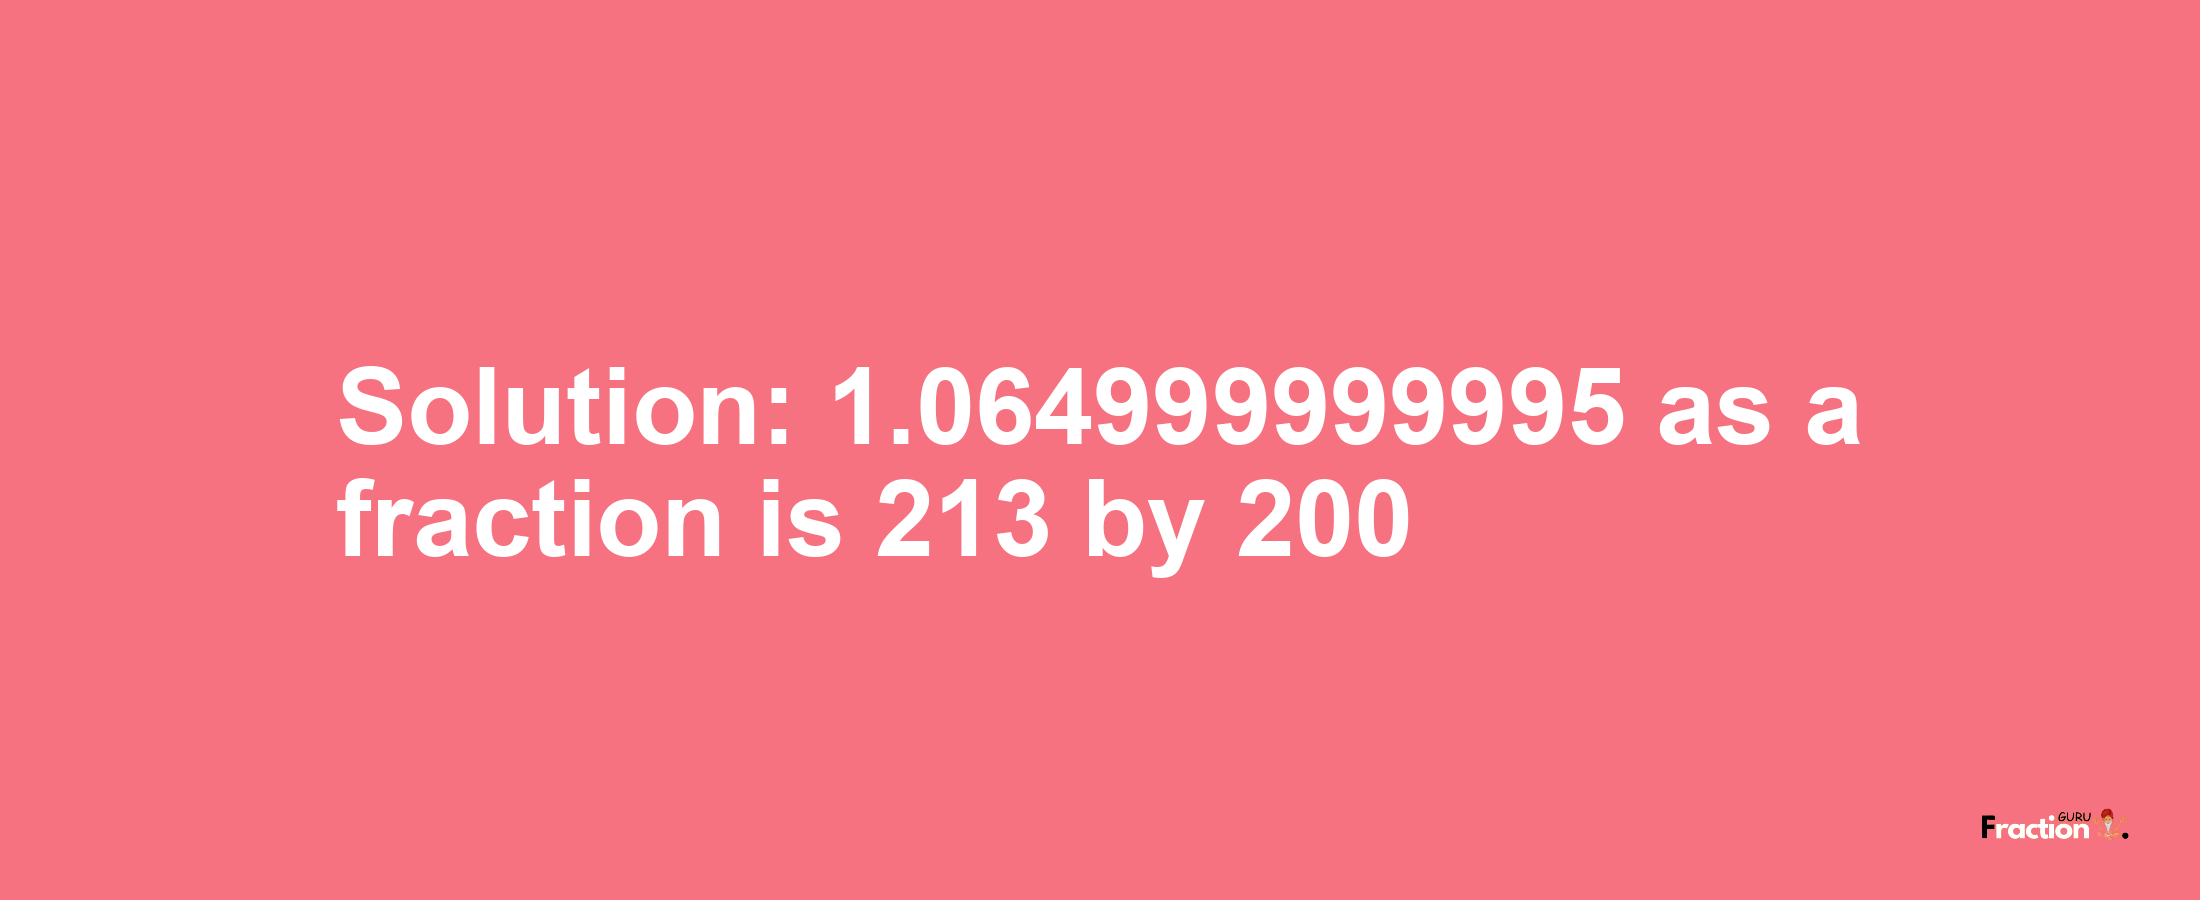 Solution:1.064999999995 as a fraction is 213/200